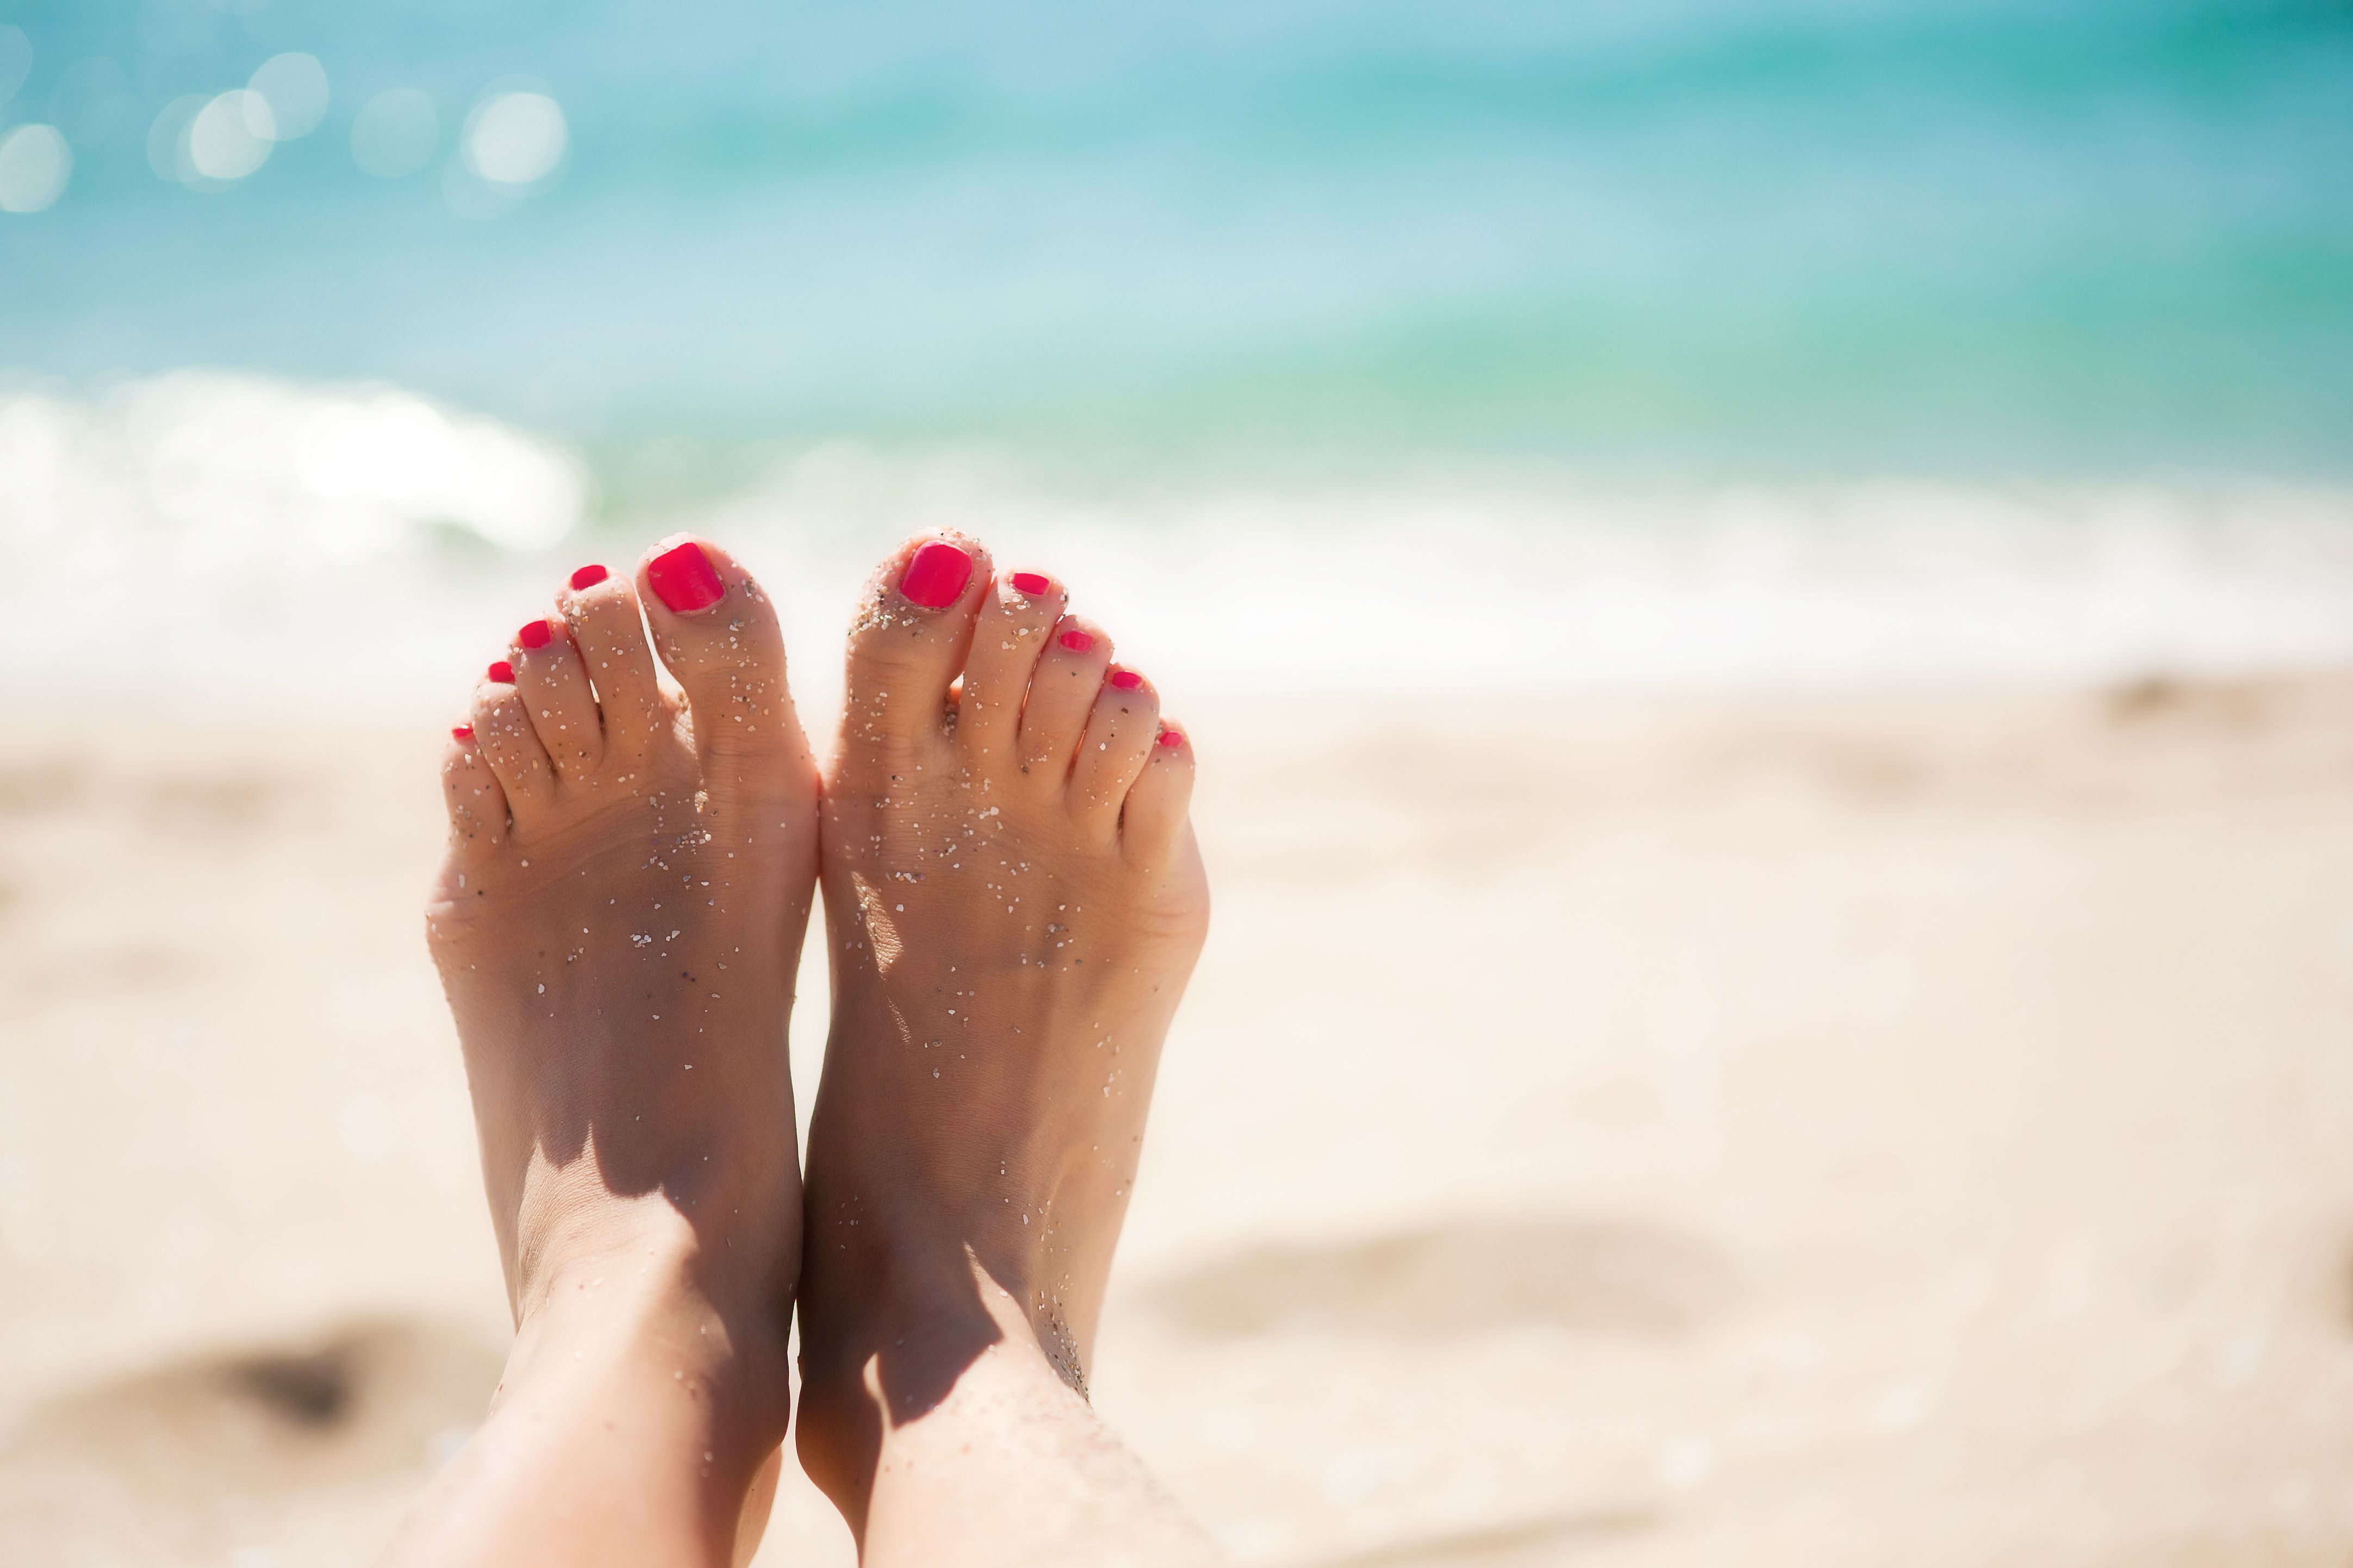 Is it possible to prevent toenail fungus?